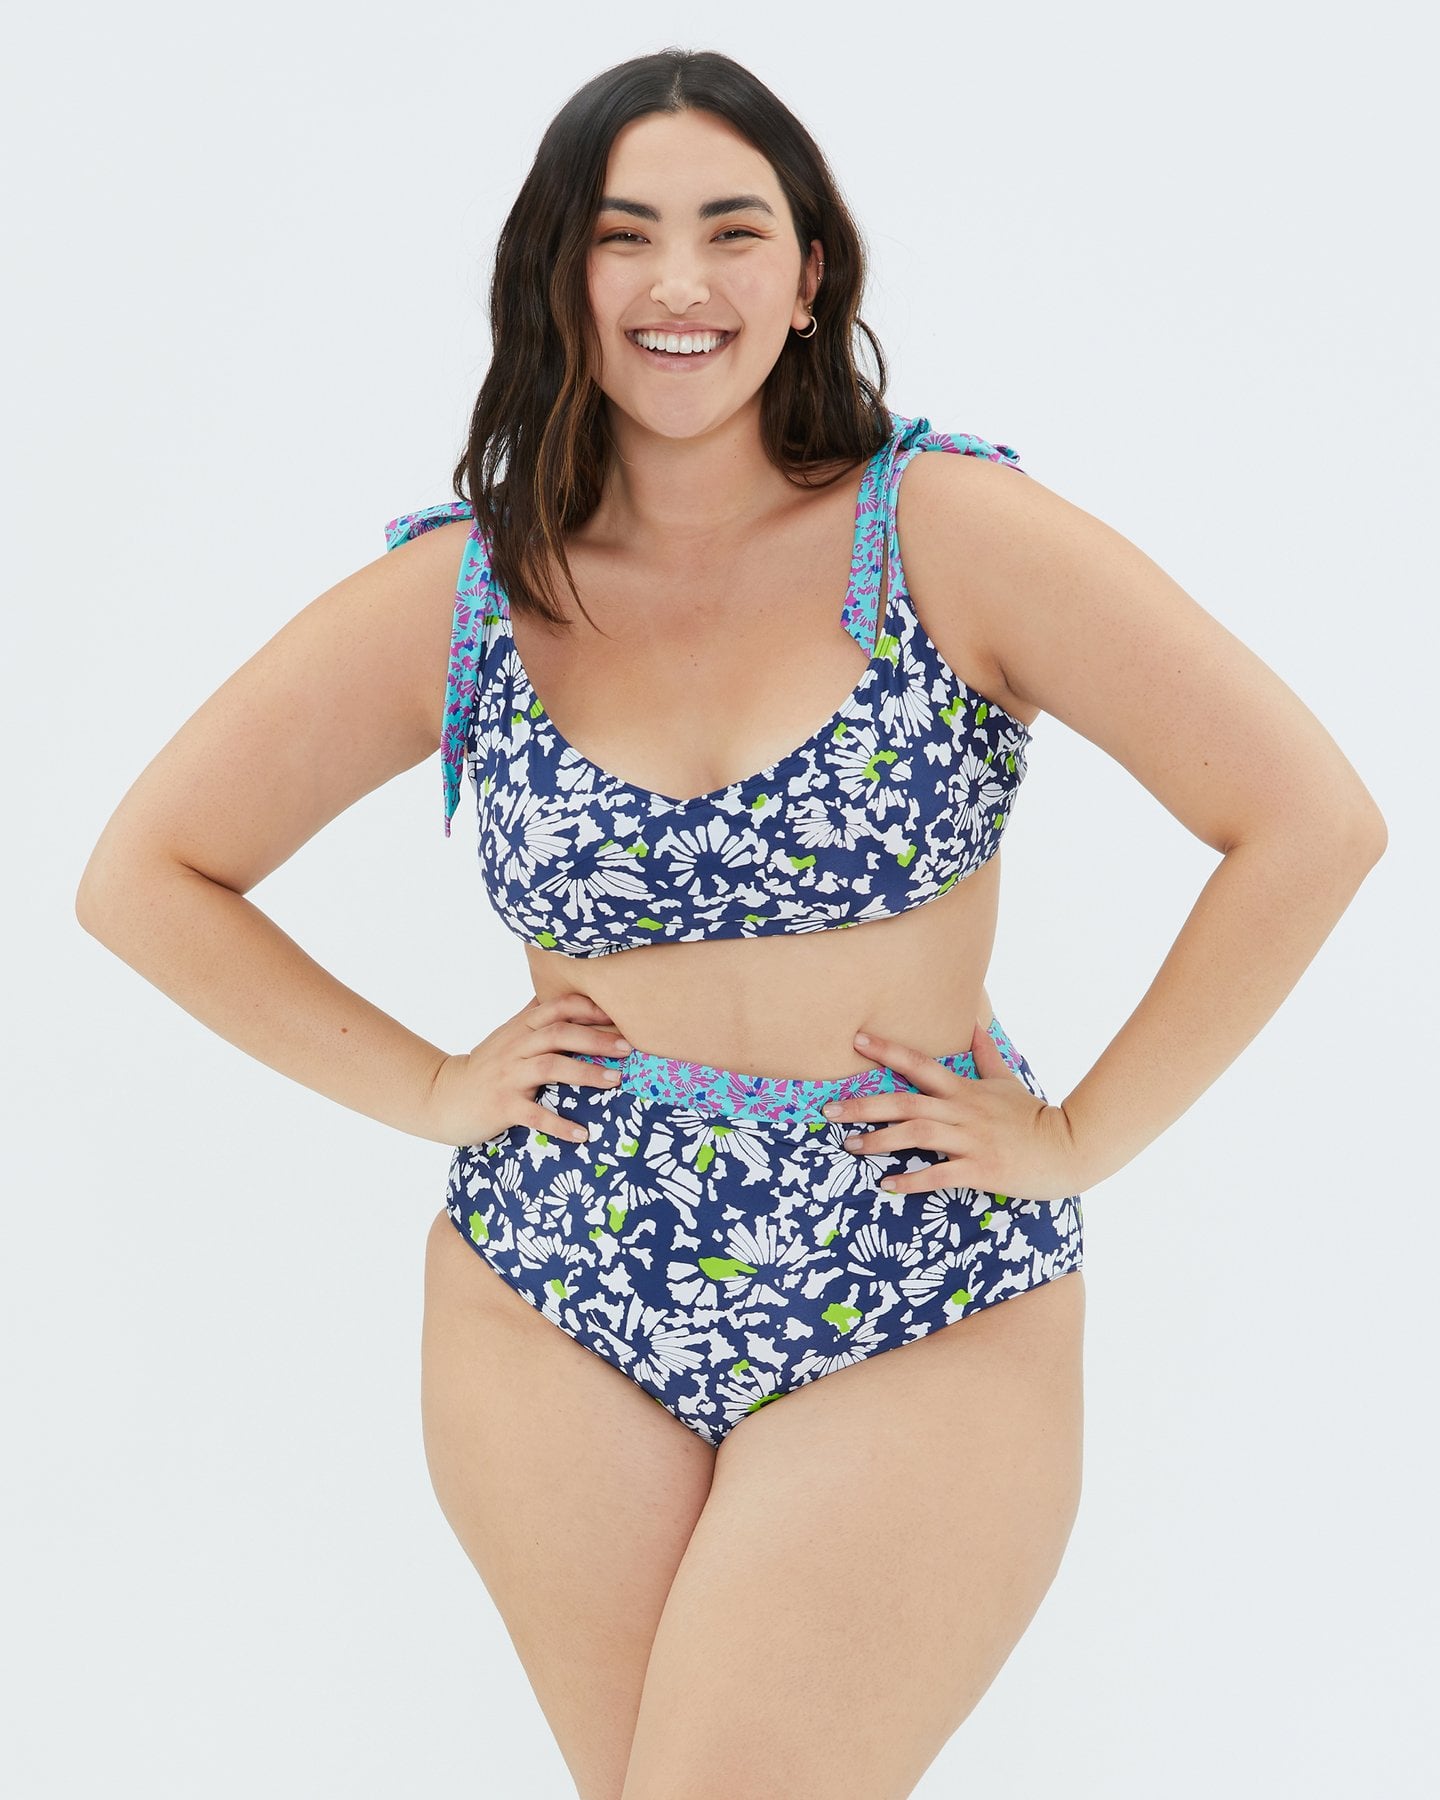 Tanya Taylor launches premiere swimwear collection with Summersalt